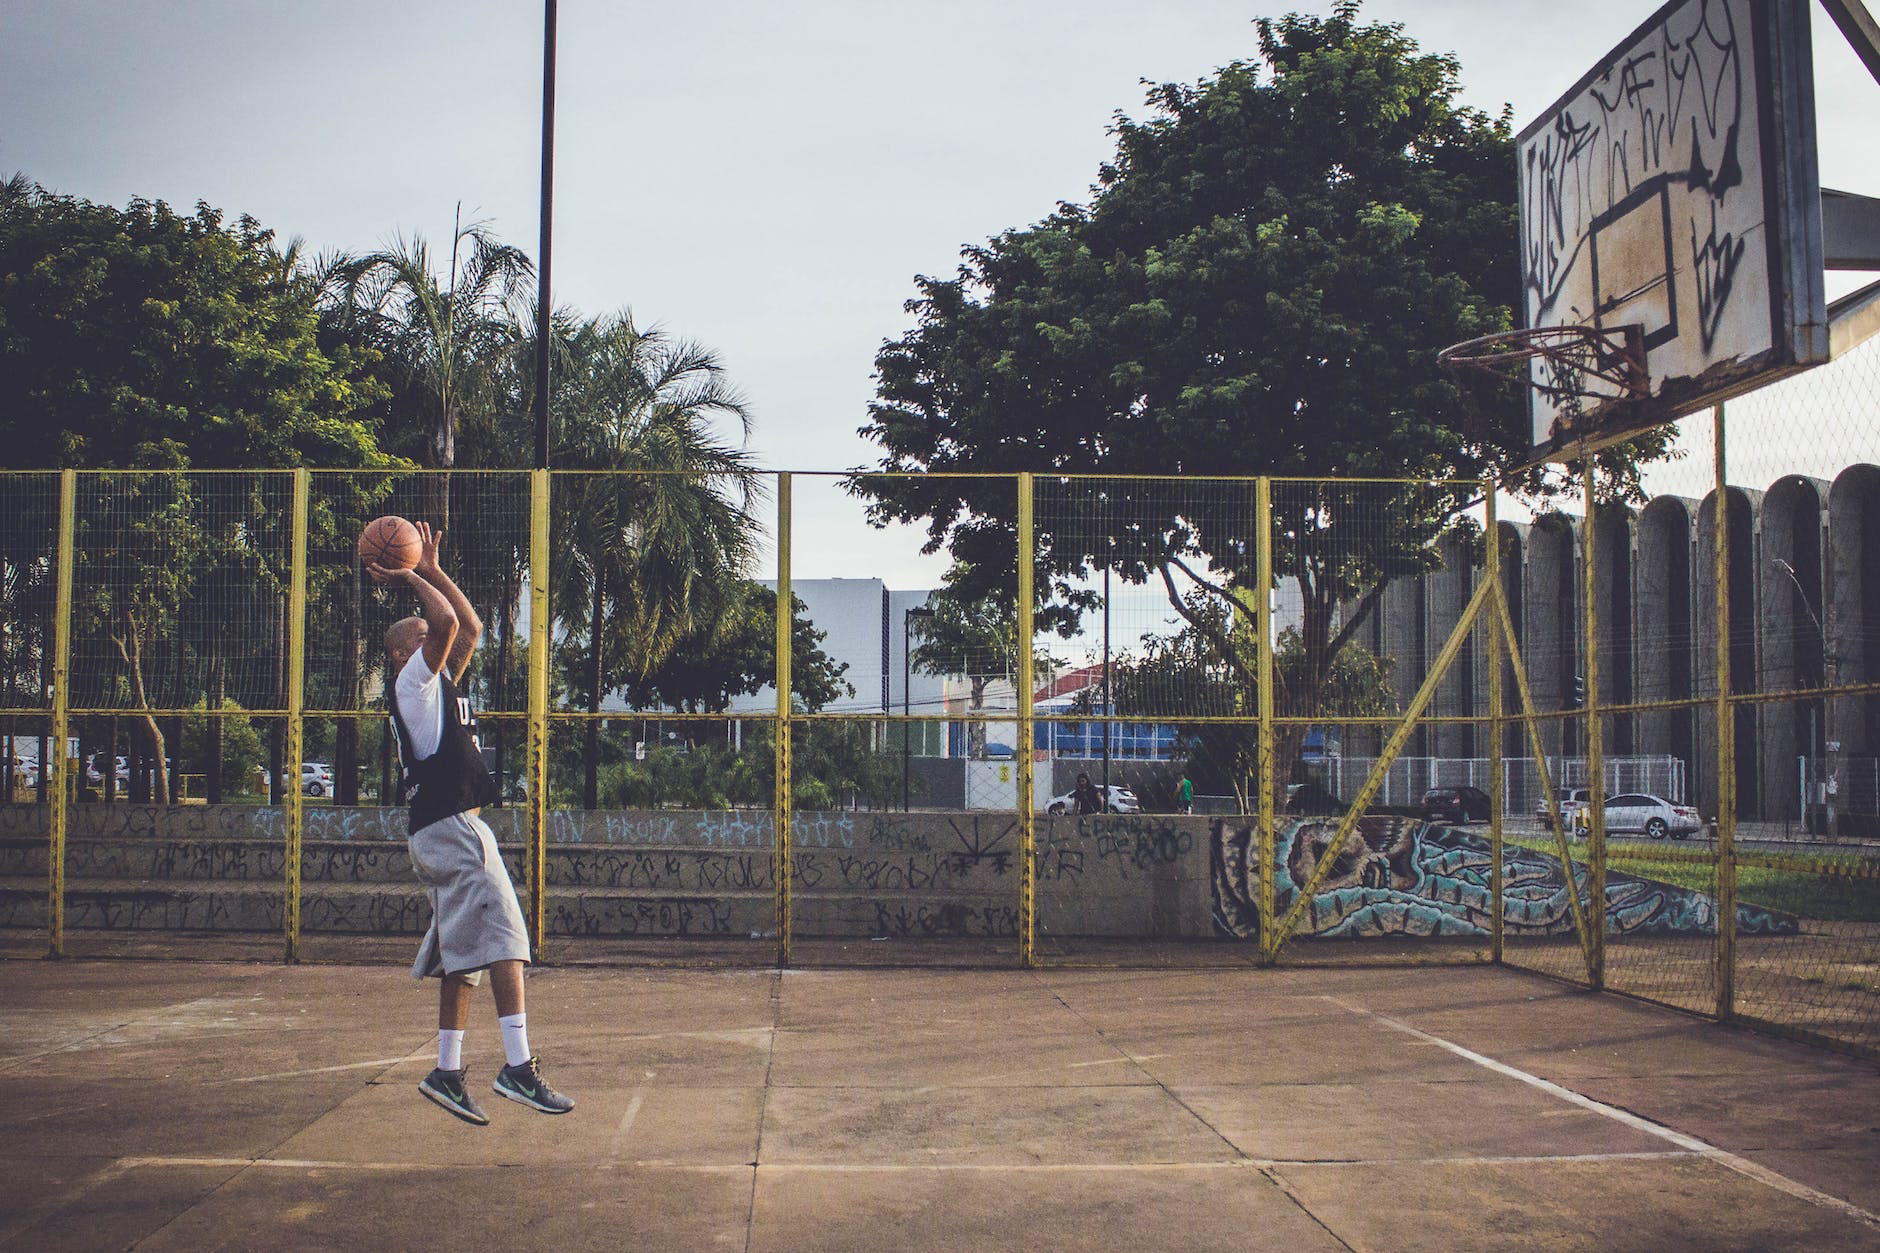 sports and outdoor activities-A man dunks a basketball in an outdoor court.